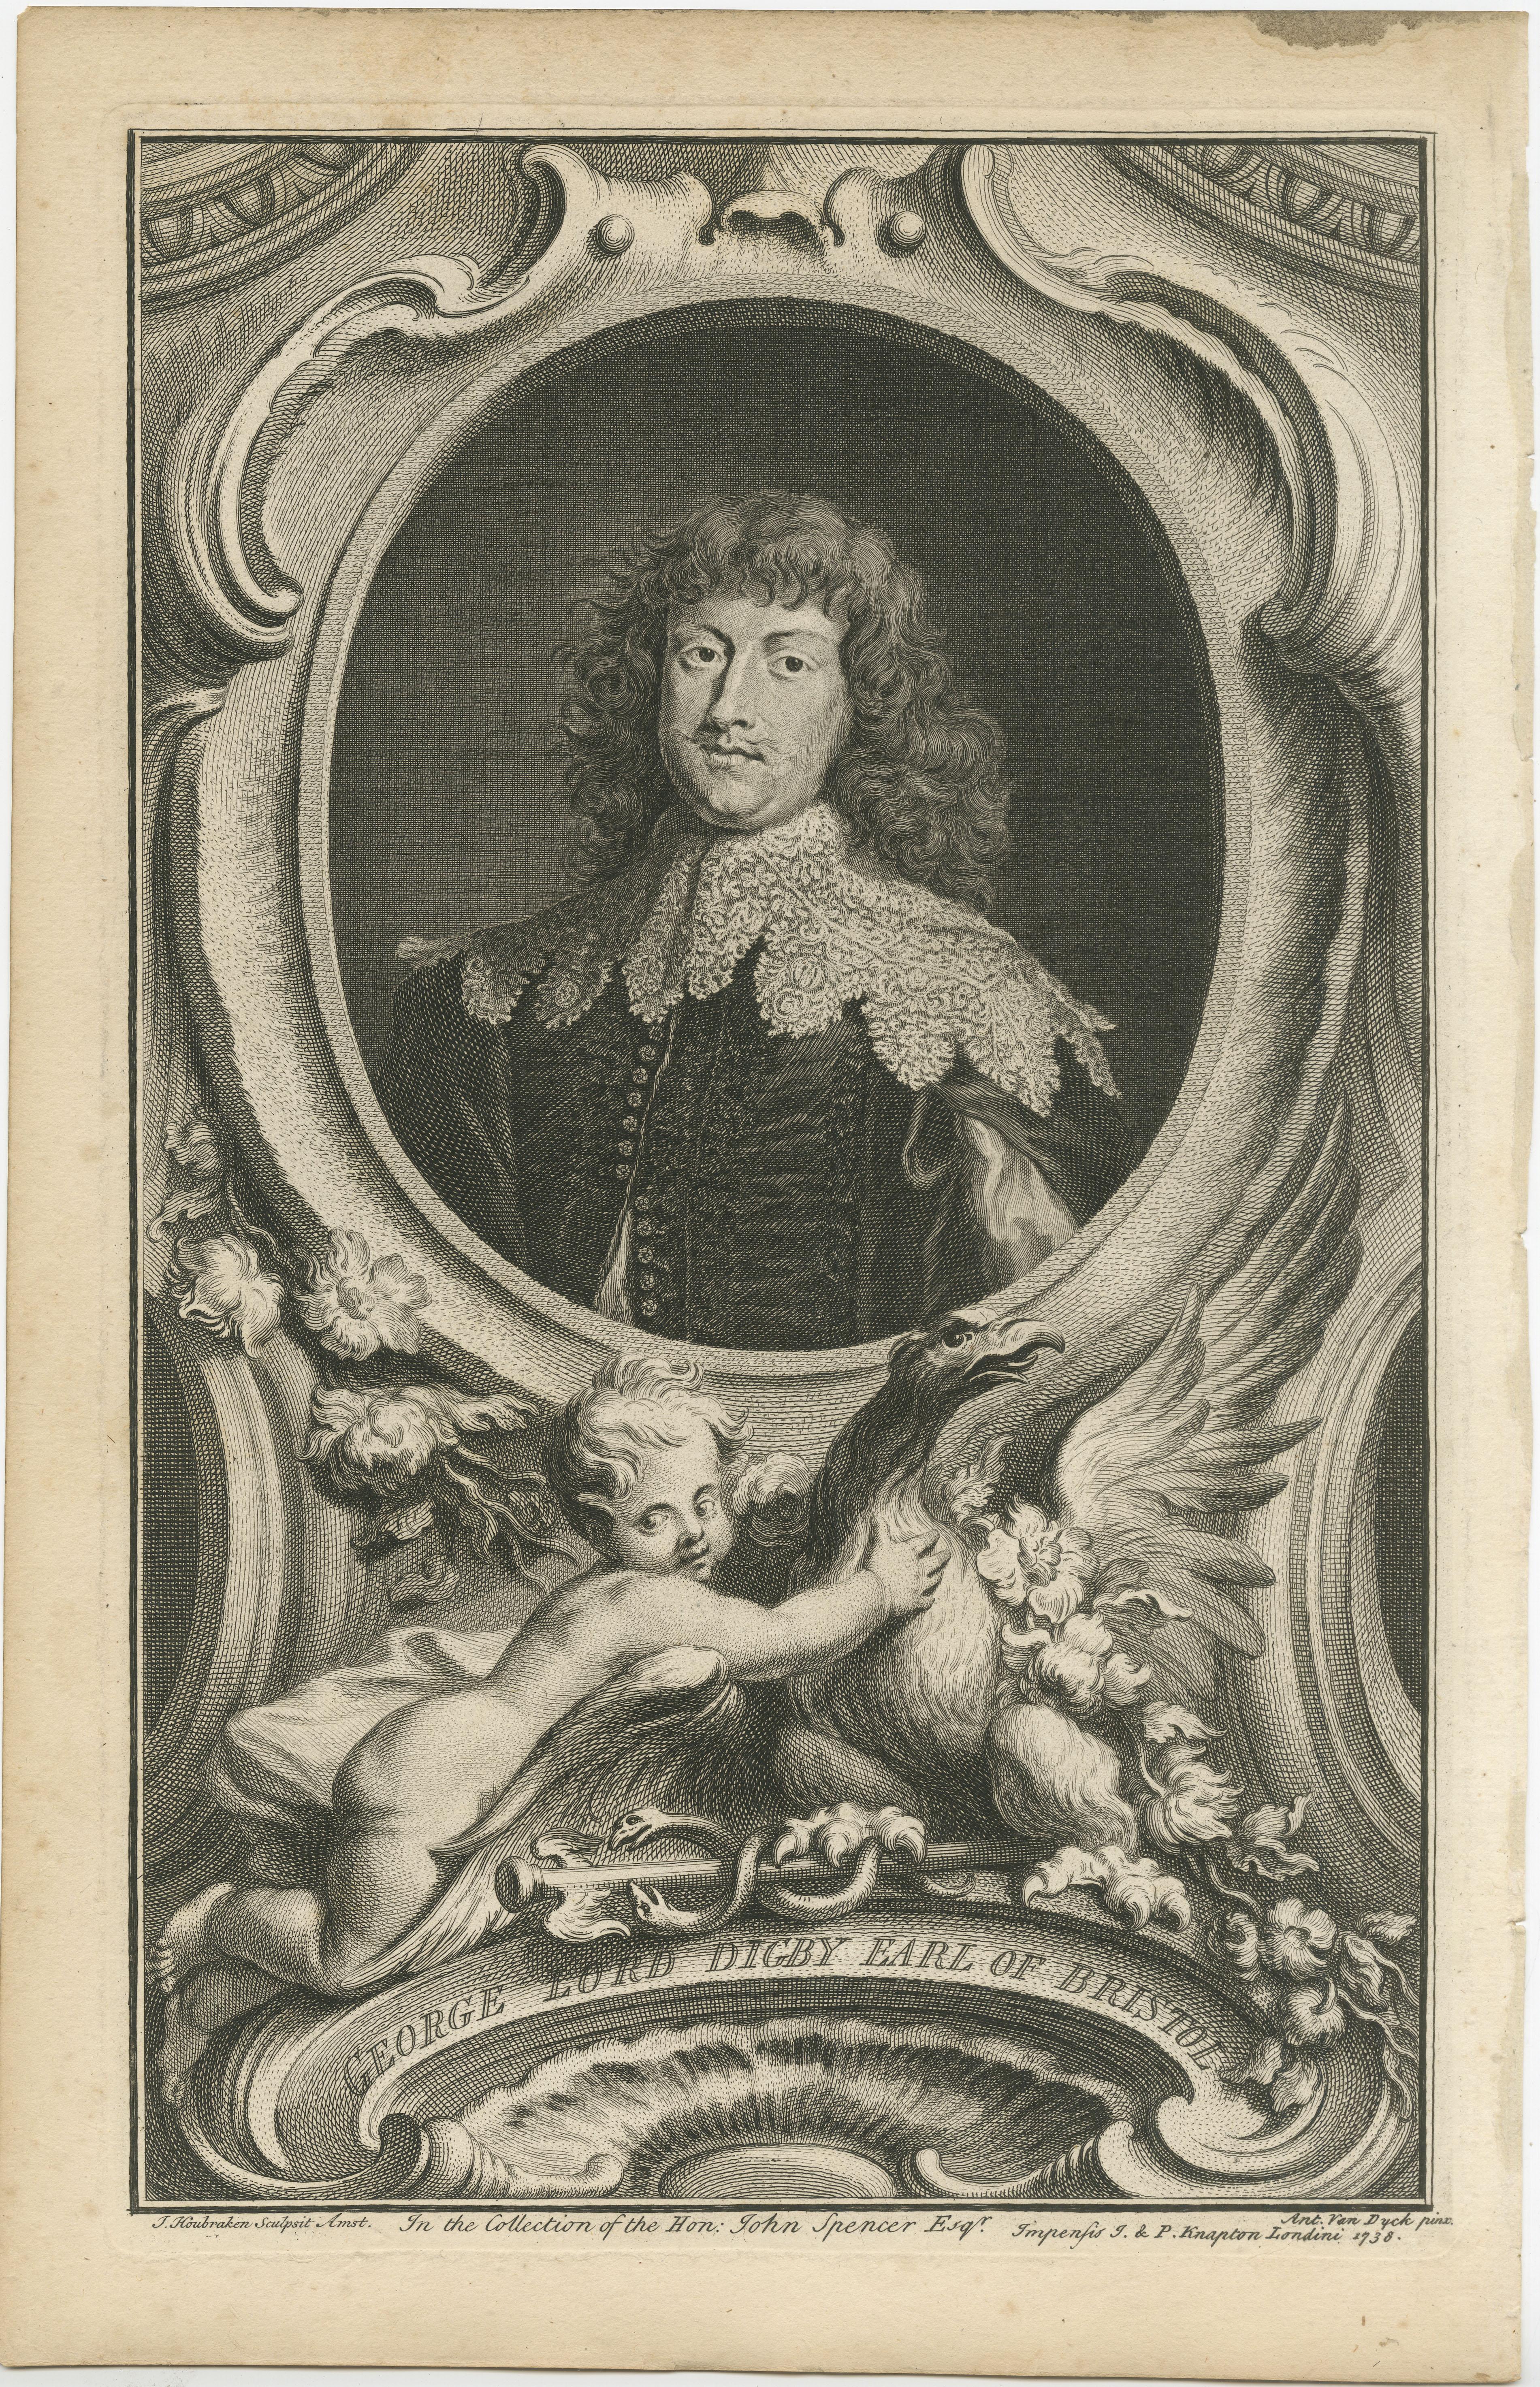 Antique portrait titled 'George Lord Digby Earl of Bristol'. George Digby, 2nd Earl of Bristol, KG (bapt. 5 November 1612 – 20 March 1677) was an English politician who as Lord Digby (a courtesy title) sat in the House of Commons from 1640 until